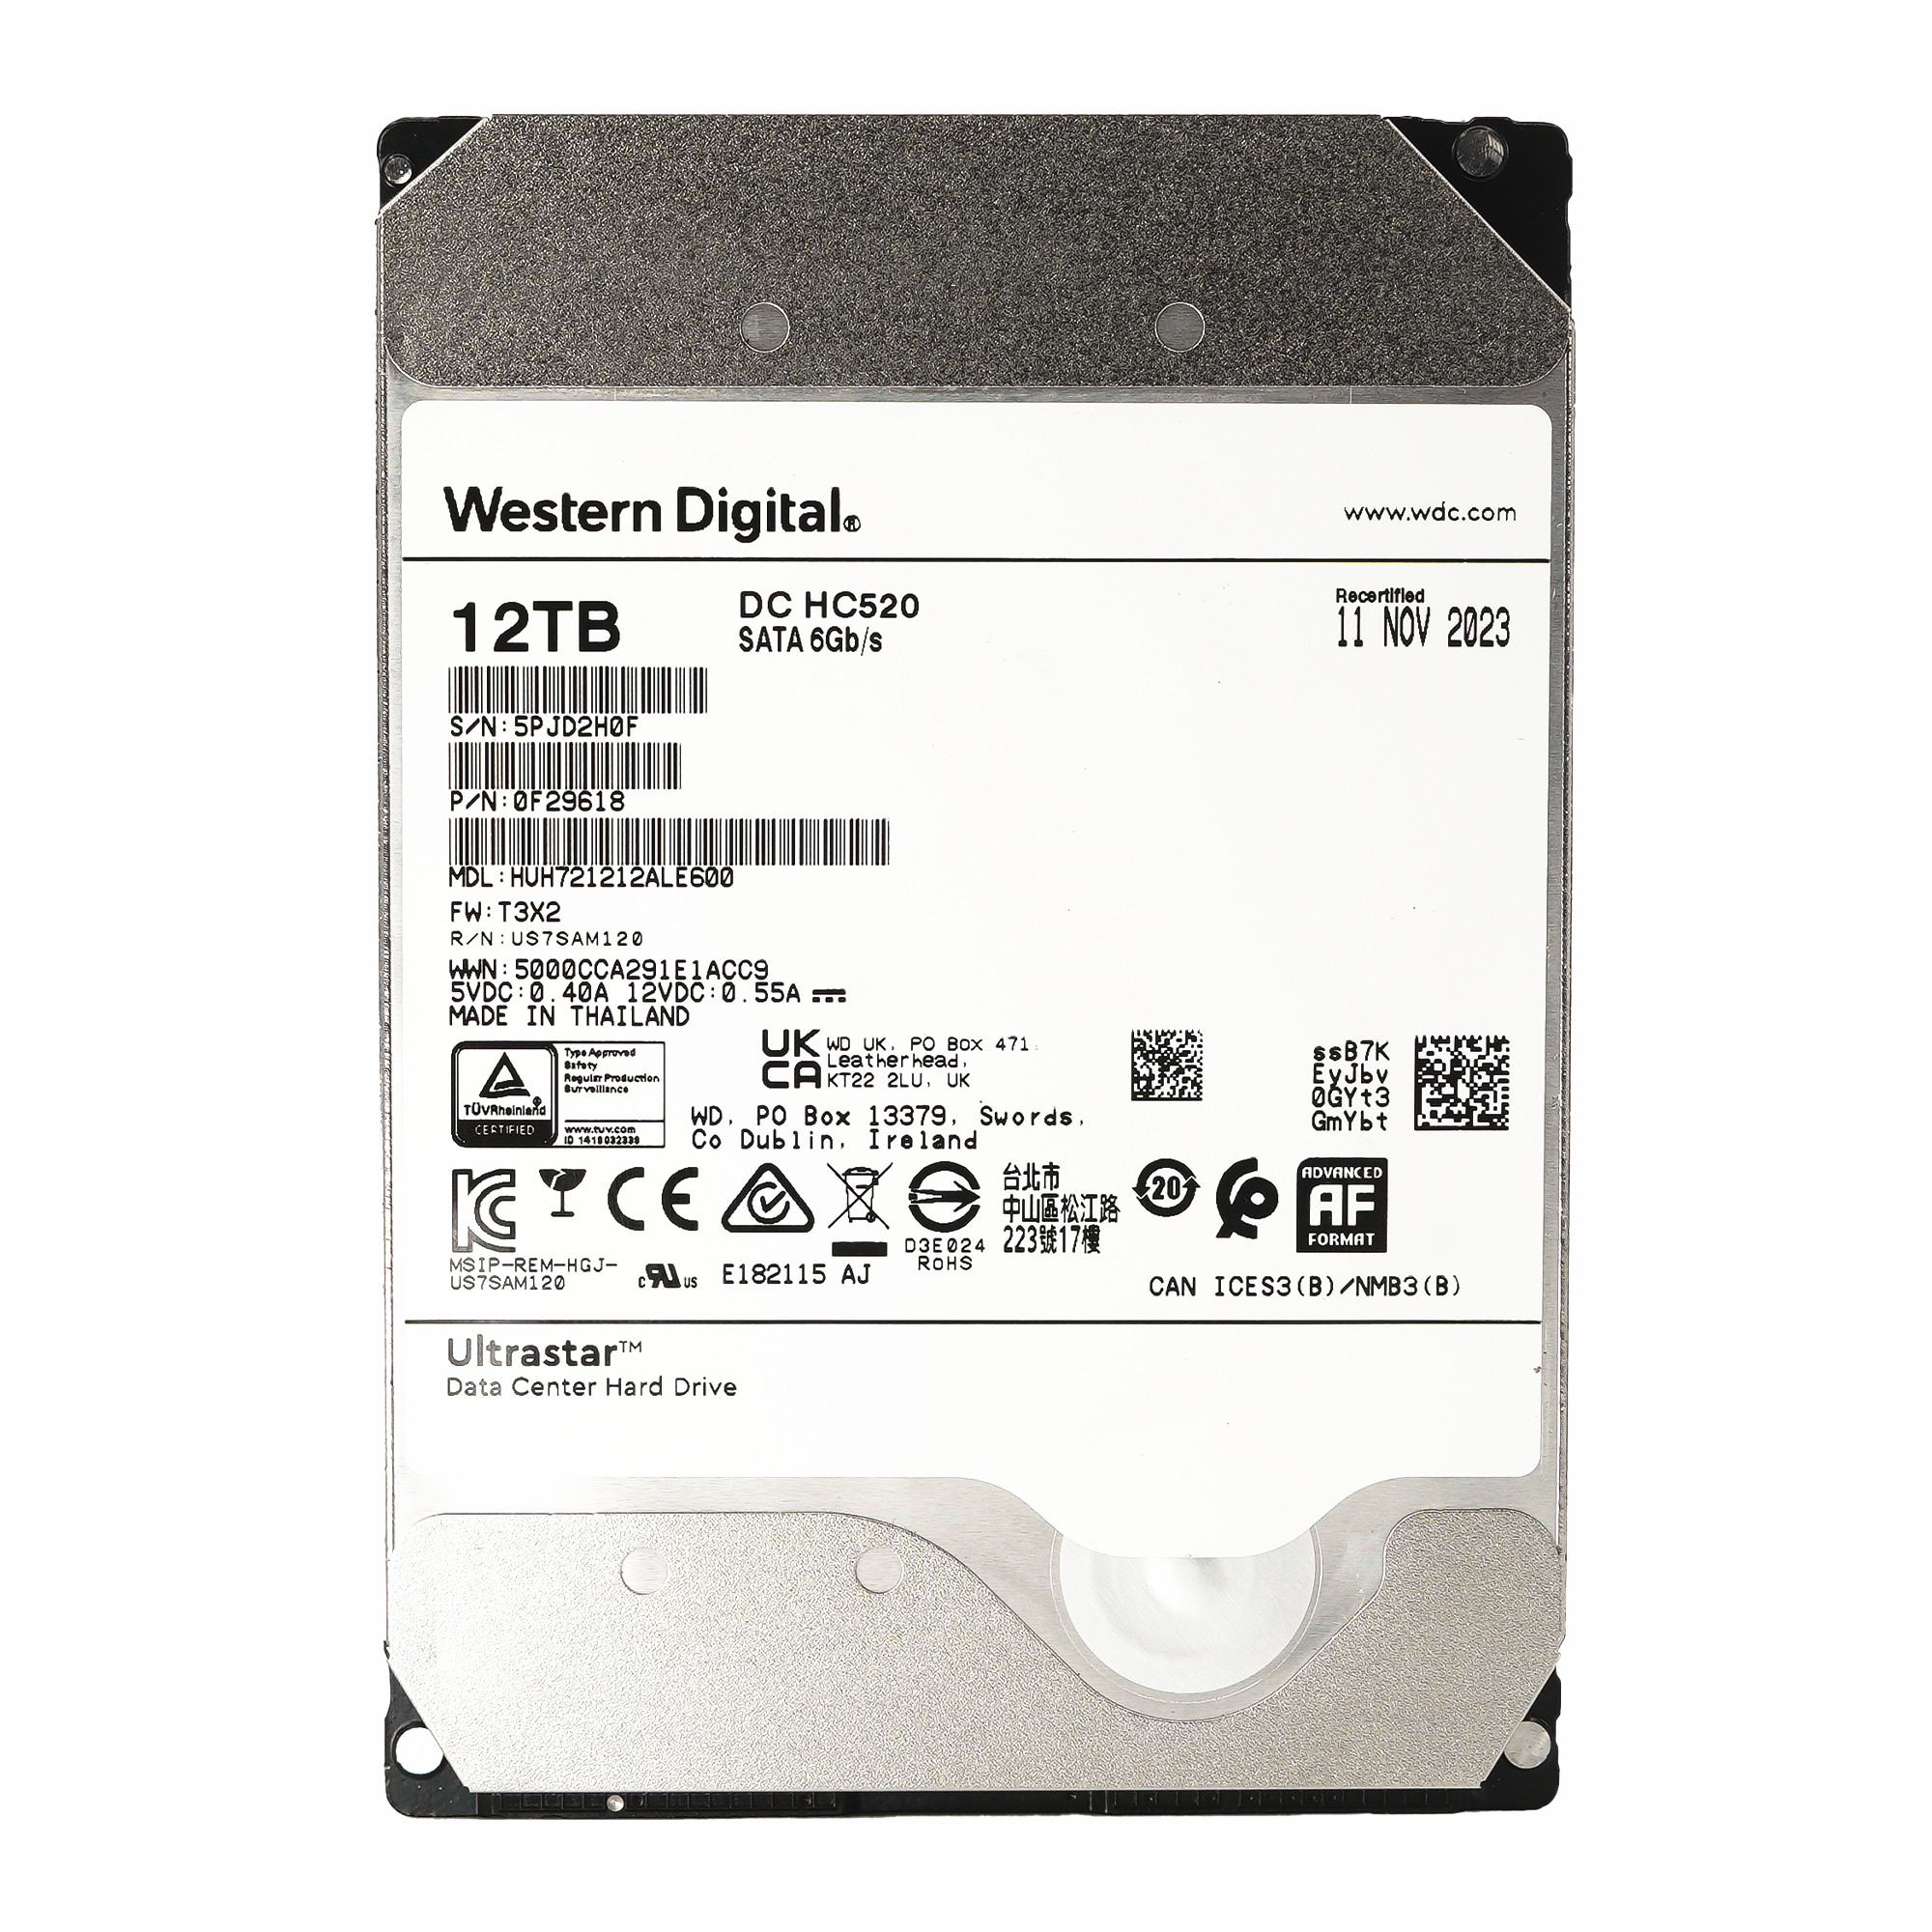 Western Digital Ultrastar DC HC520 HUH721212ALE600 0F29618 12TB 7.2K RPM SATA 6Gb/s 512e Power Disable 3.5in Recertified Hard Drive - Front View